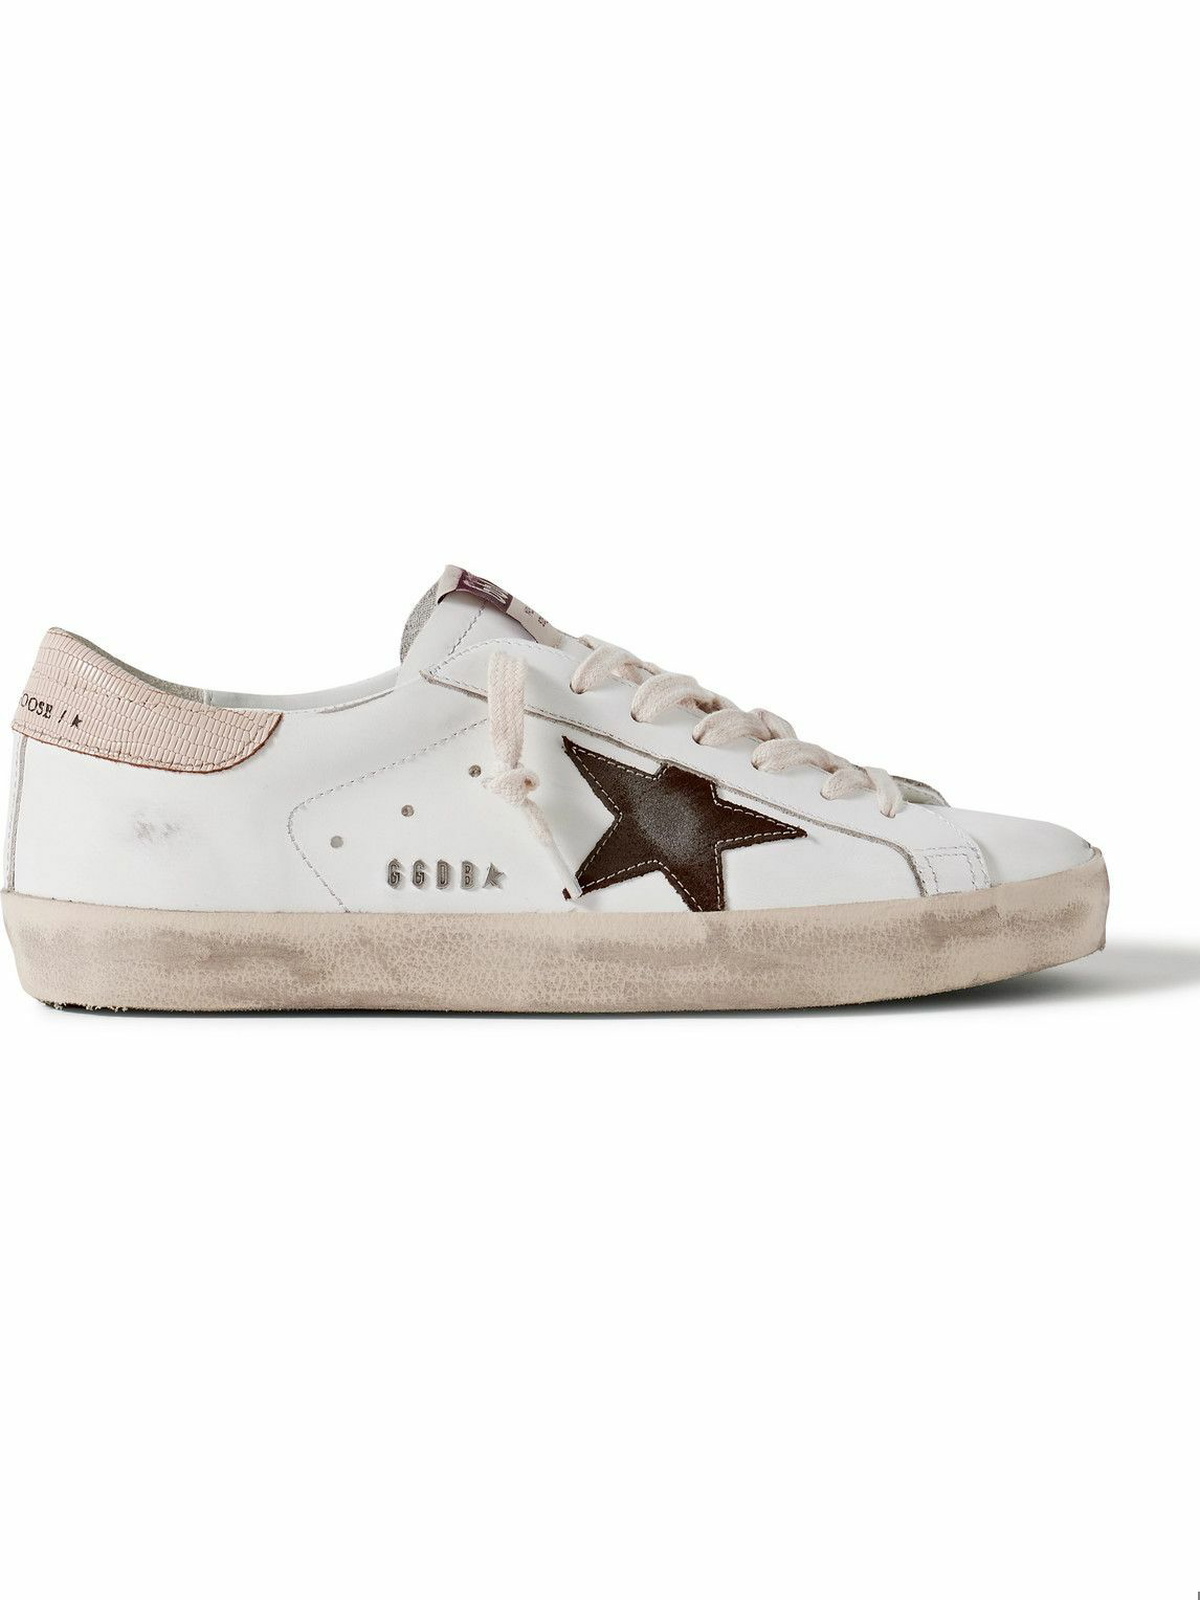 Golden Goose - Super Star Distressed Suede-Trimmed Leather Sneakers ...